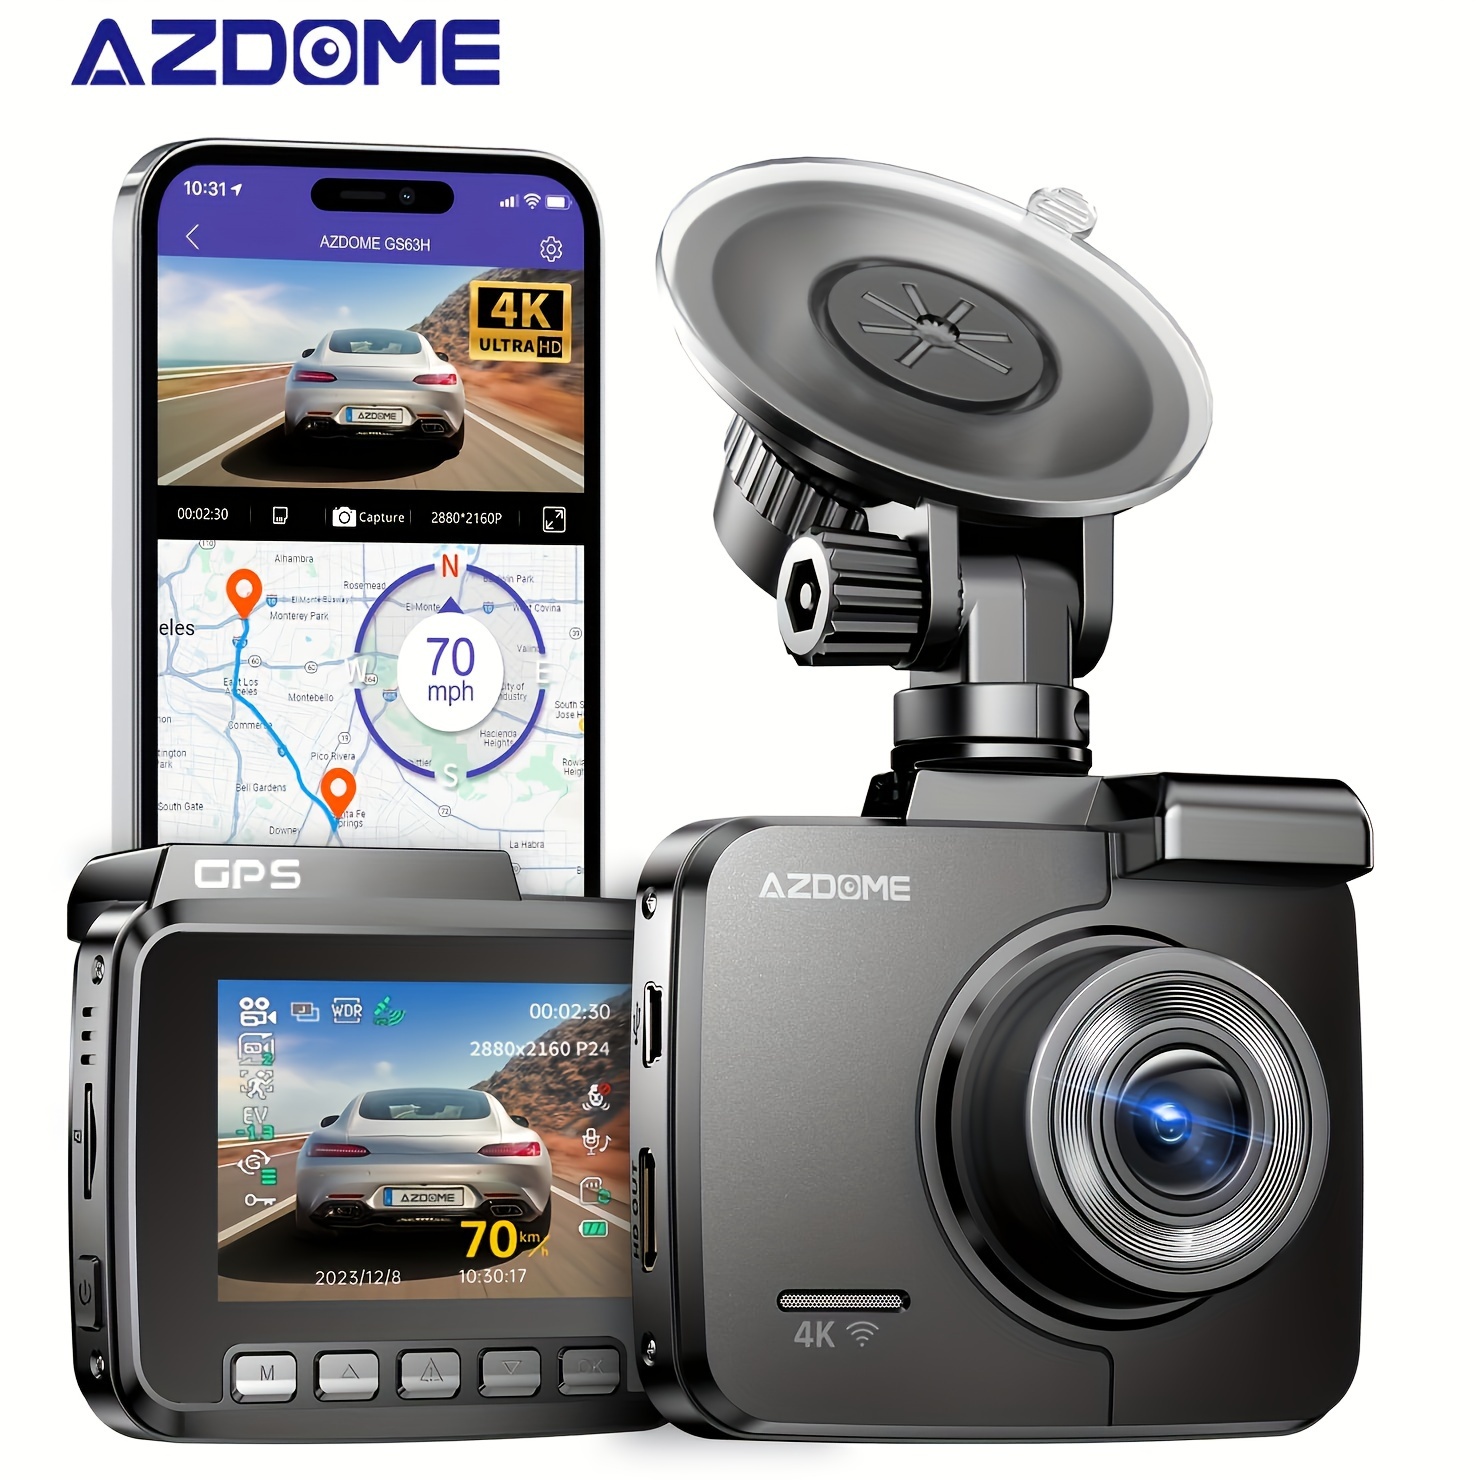 

Azdome 4k Dash Cam, Super Night Vision, Built-in Gps And Wifi, Parking Monitor - Uhd 2160p Car Video Recorder 170° Wide Angle Dashboard, Camera Loop Recording Easy To Install